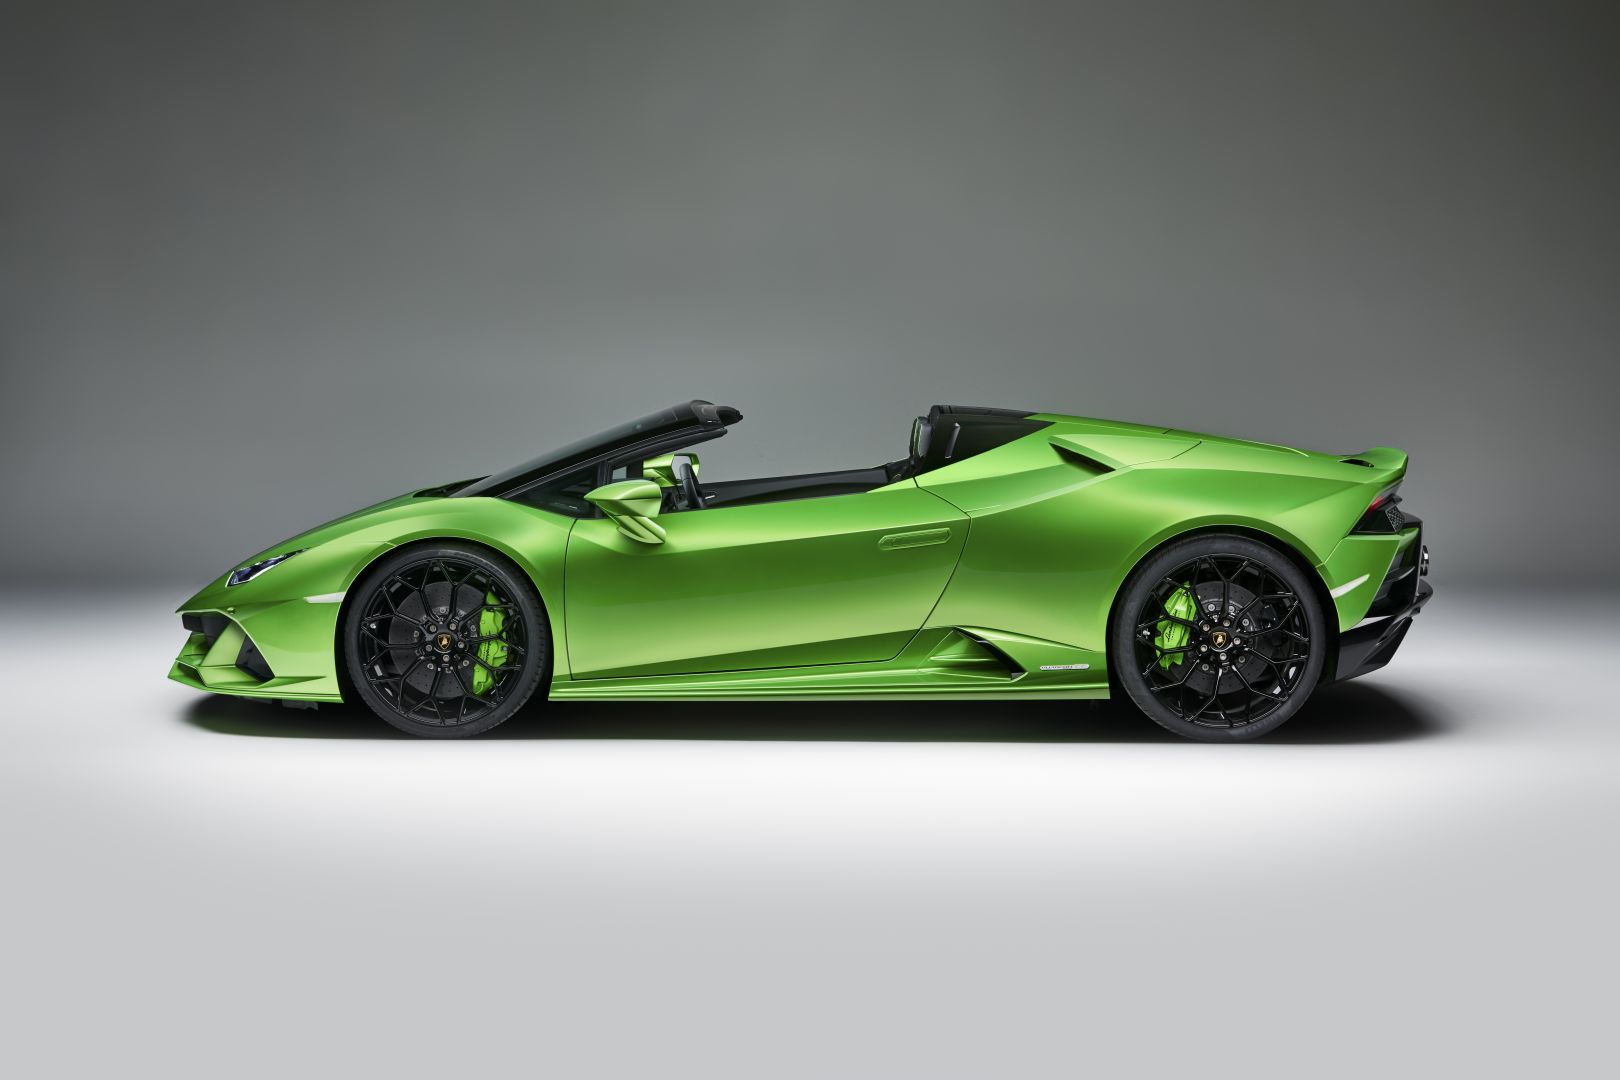 Lamborghini Huracán Spyder - Technical Specifications, Pictures, Videos